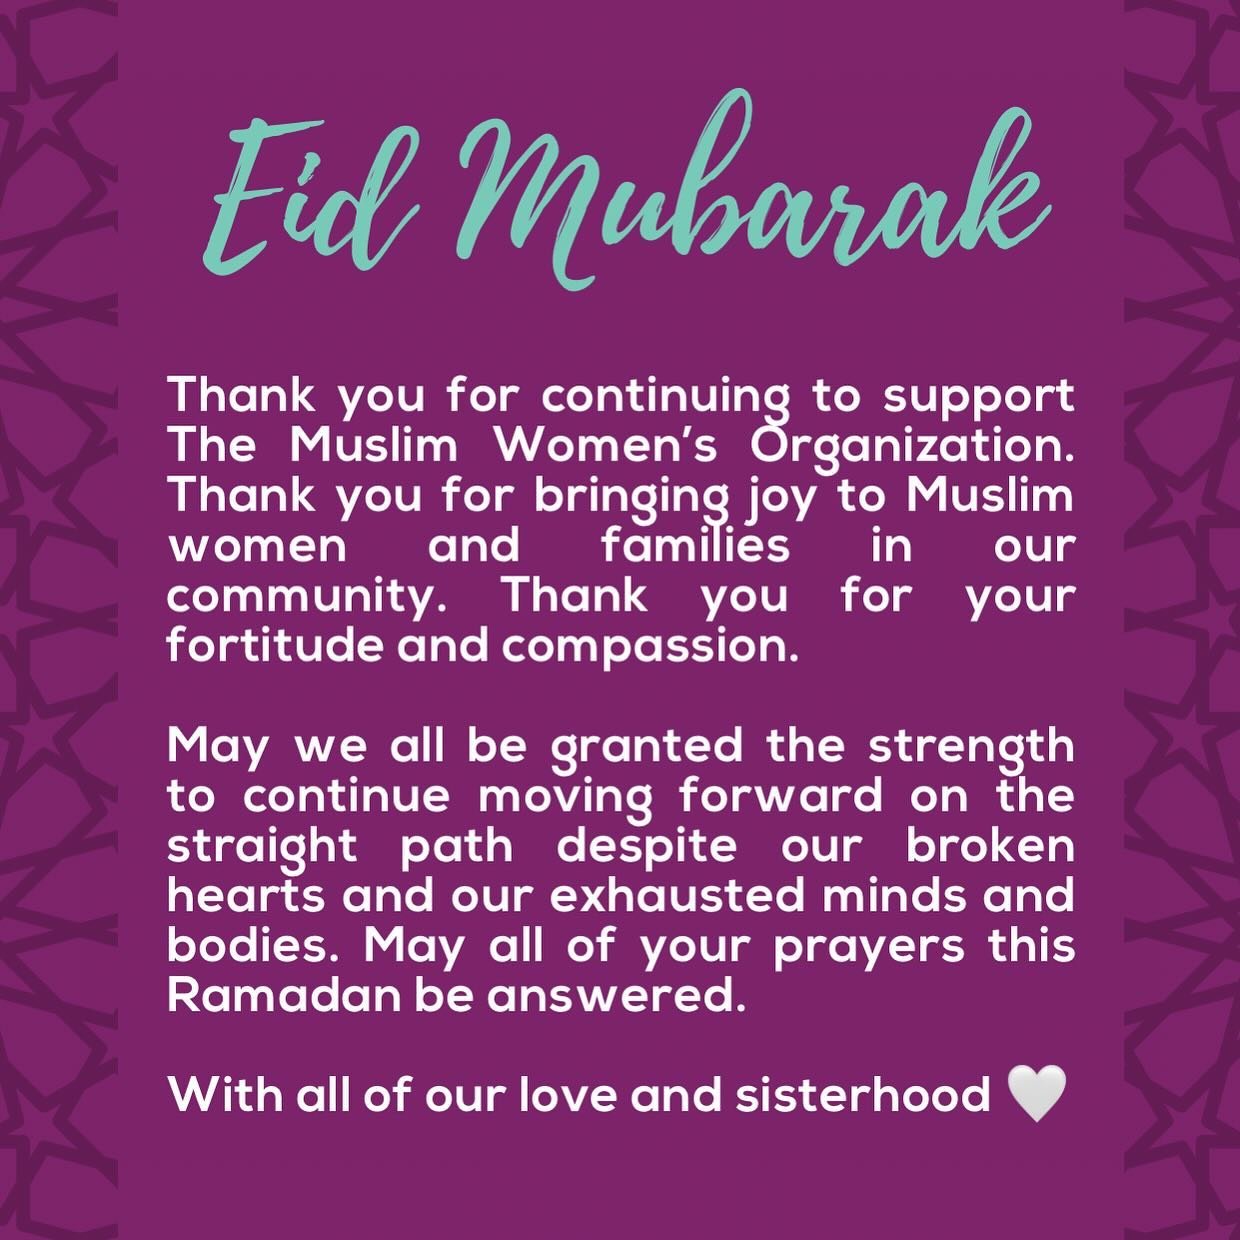 Eid Mubarak! We hope you have found time for rest and joy in these Eid days. 

Alhamdulillah our hearts were filled seeing you and your families at @eidorlando - we&rsquo;re always so happy to have time together. 

Thank you to everyone who donated t